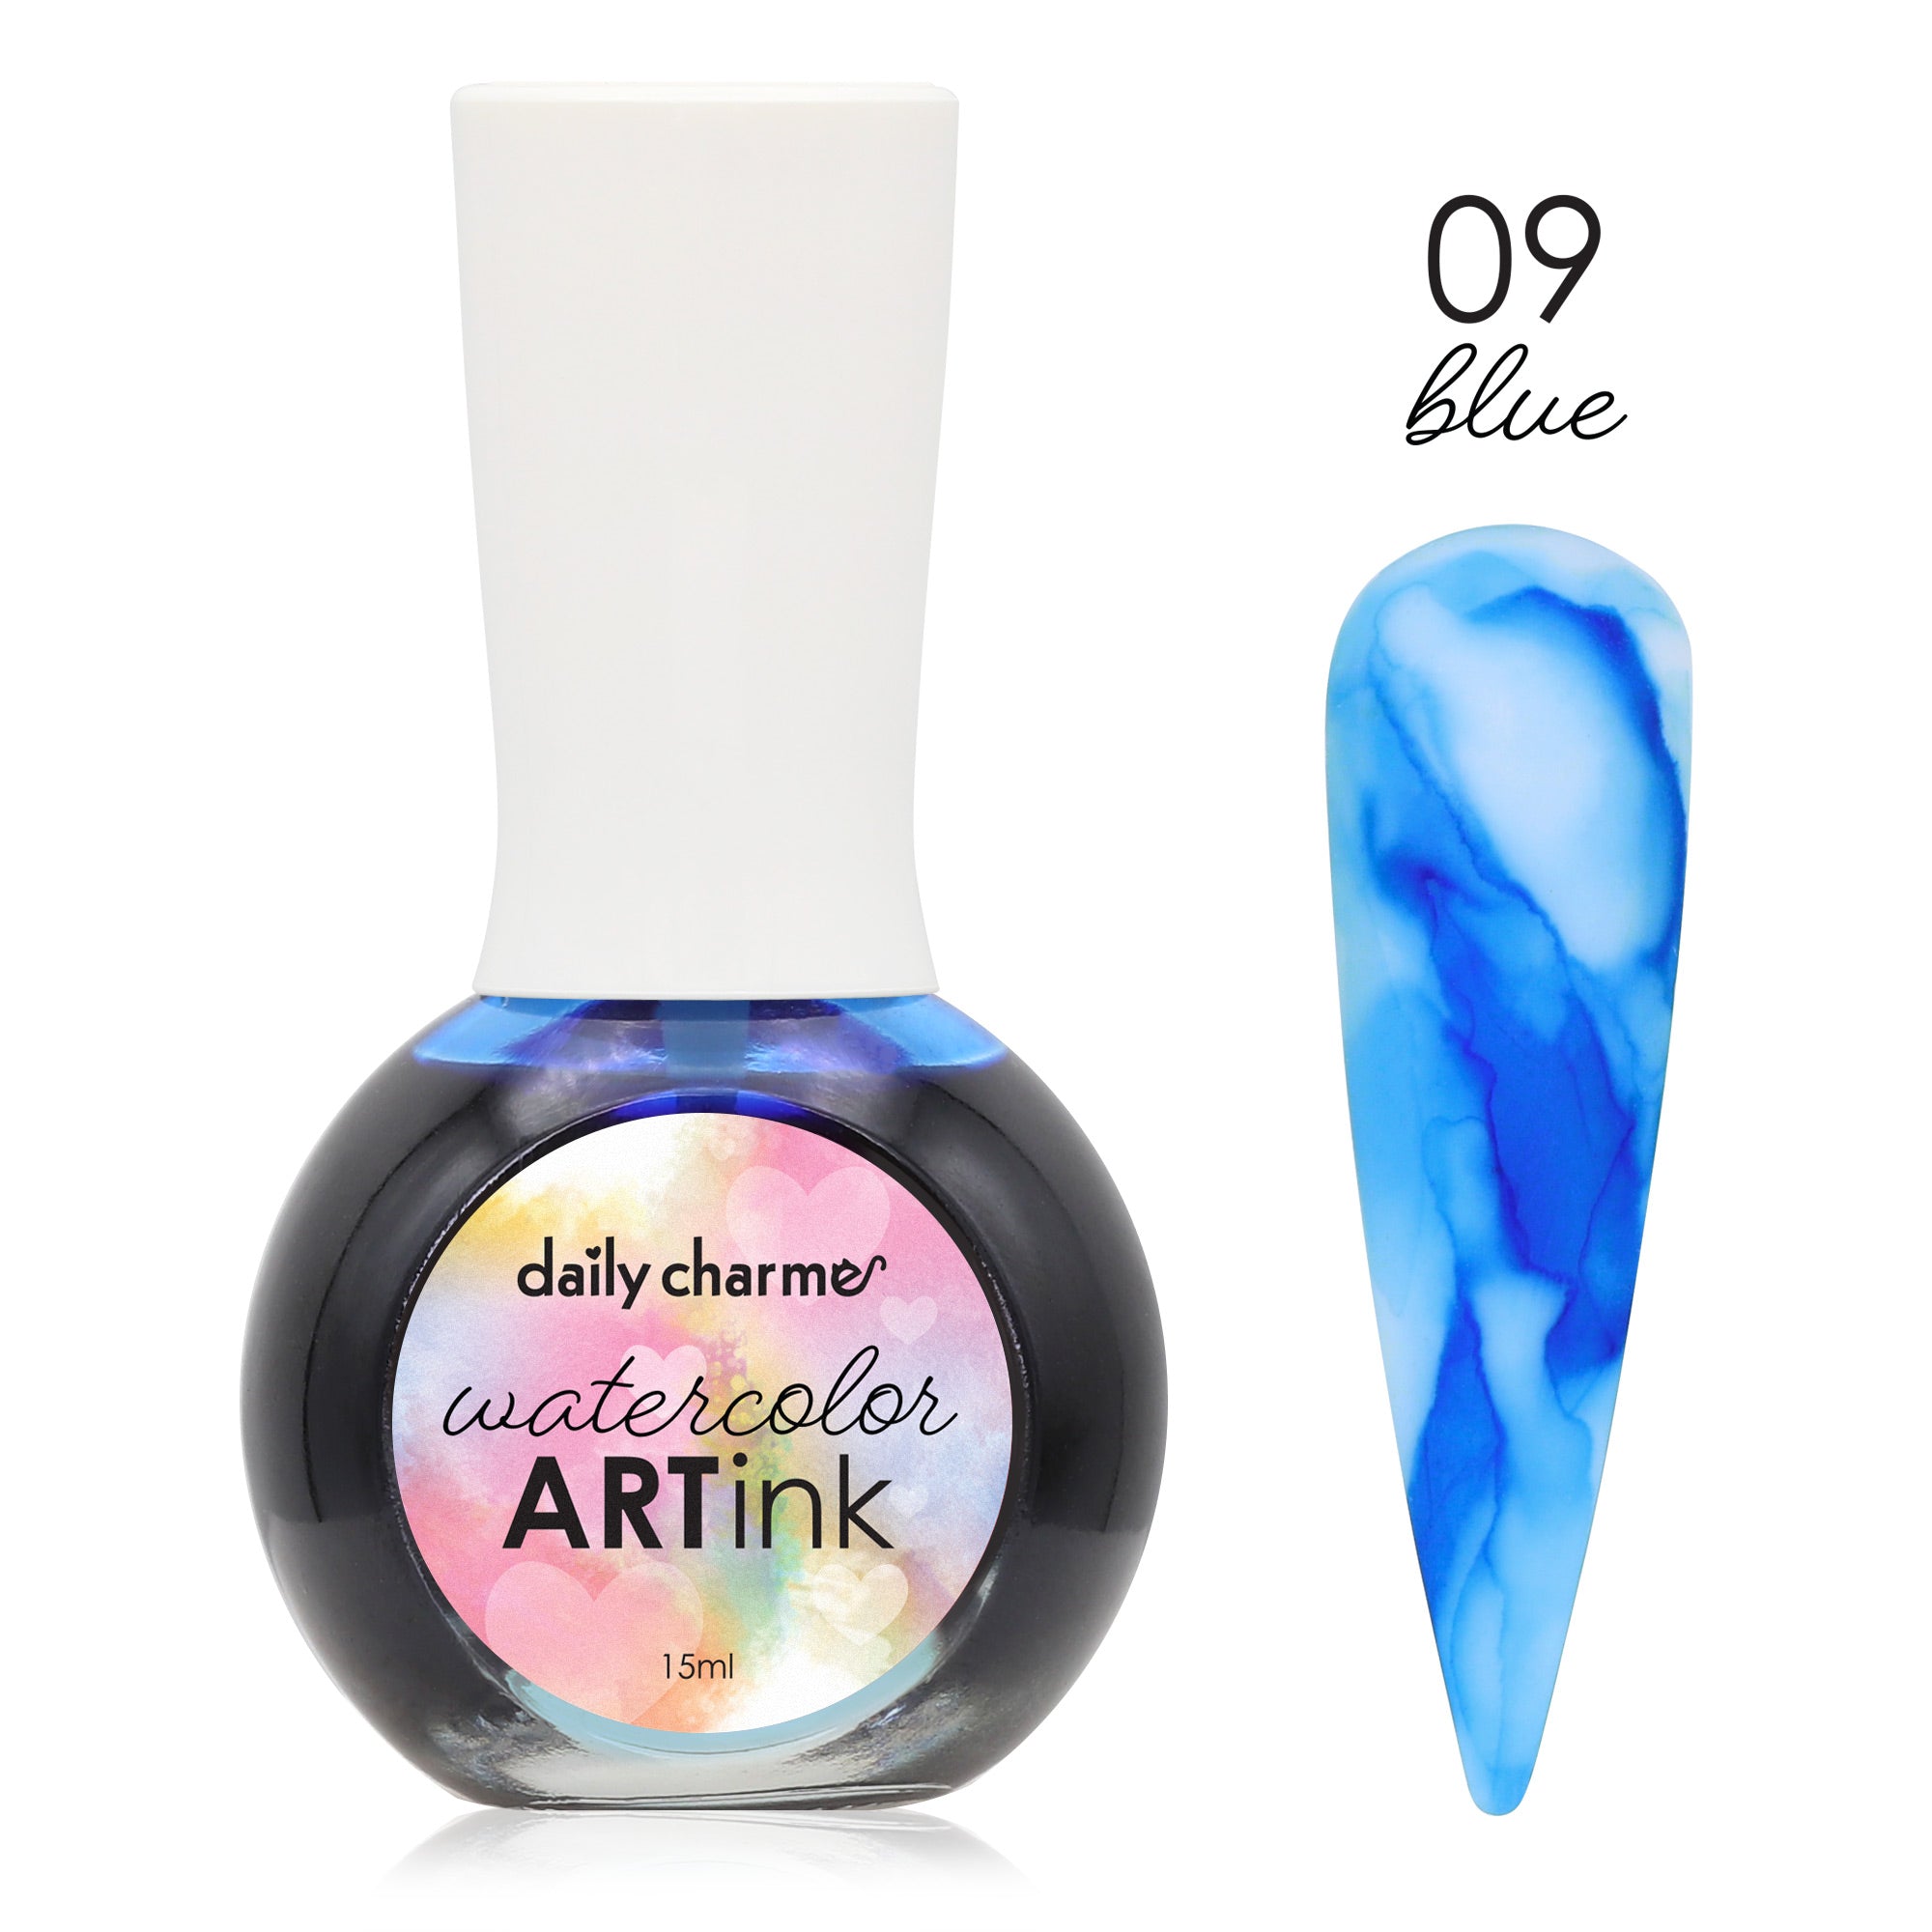 Daily Charme Watercolor Art Ink / 09 Blue Ocean Marble Nail Design